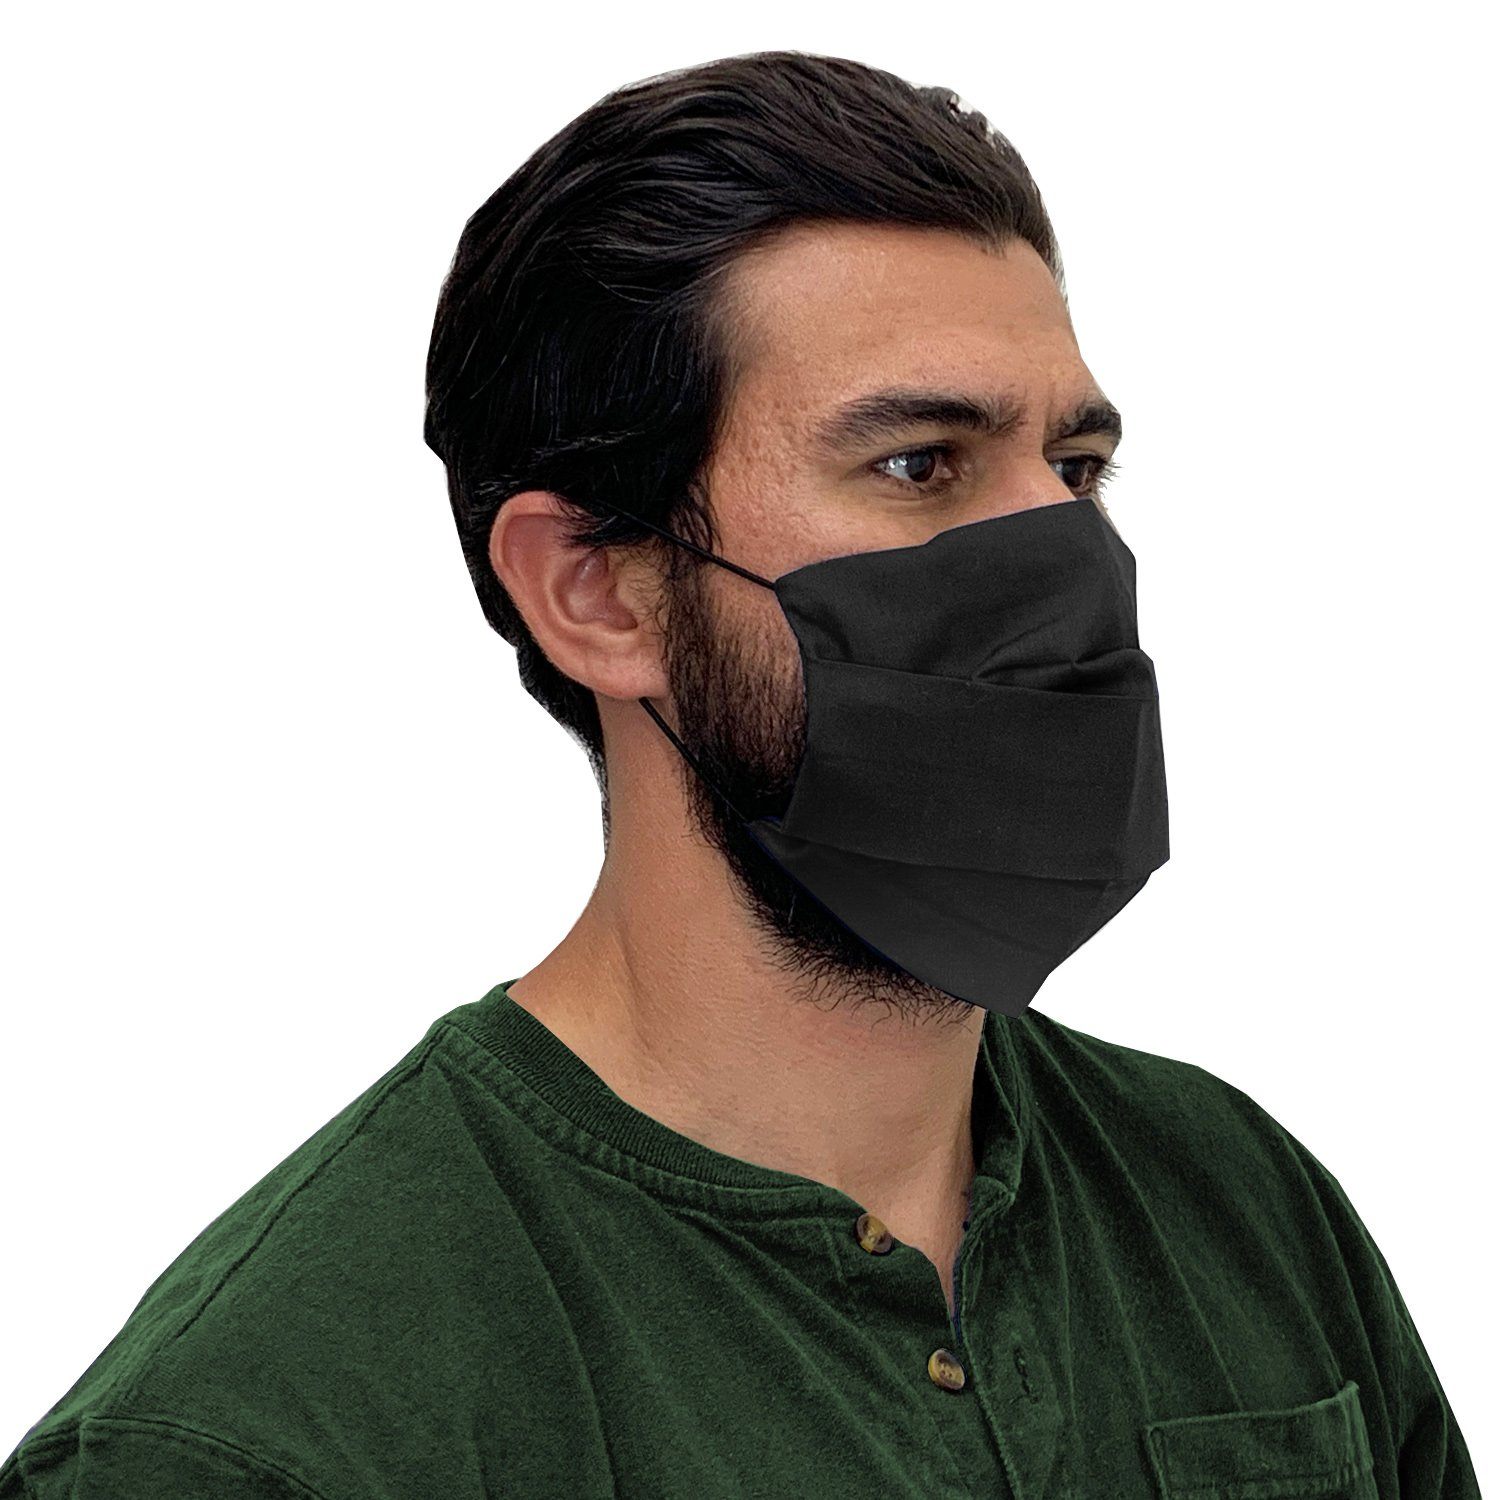 XL Face Mask- Reusable & Washable with Cotton Blend Fabric - Adjustable with Pocket Filter Face Mask Square Up Fashions Black 1 Individual 